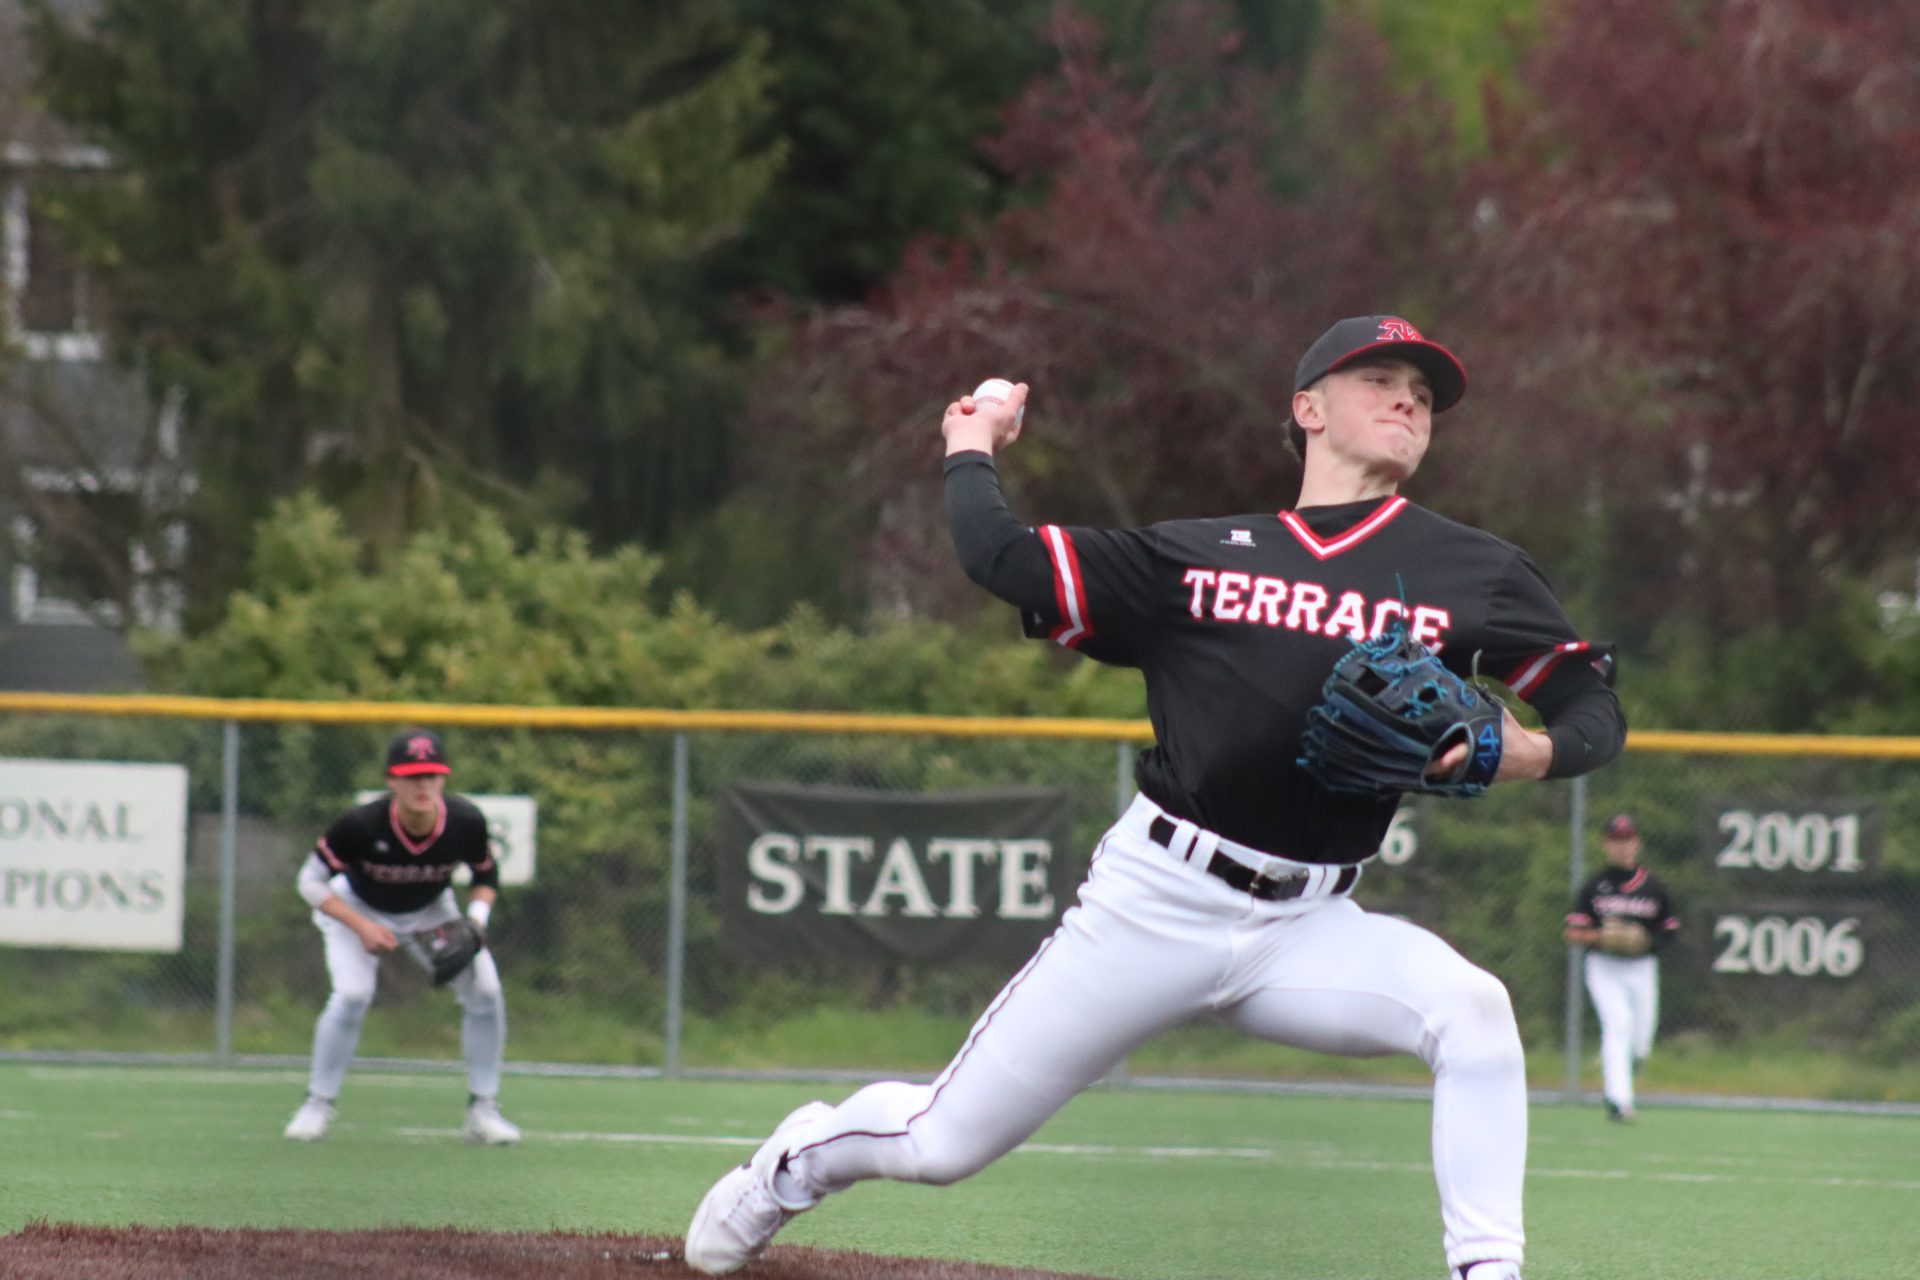 NO HITTER! Sophomore Owen Meek throws a fastball against the Lynnwood
Royals in a complete no-hitter 7-inning game on April 15. The Hawks won 7-0, and although there have been combined no-hitters in school history, Meek’s is the first by a solo pitcher..